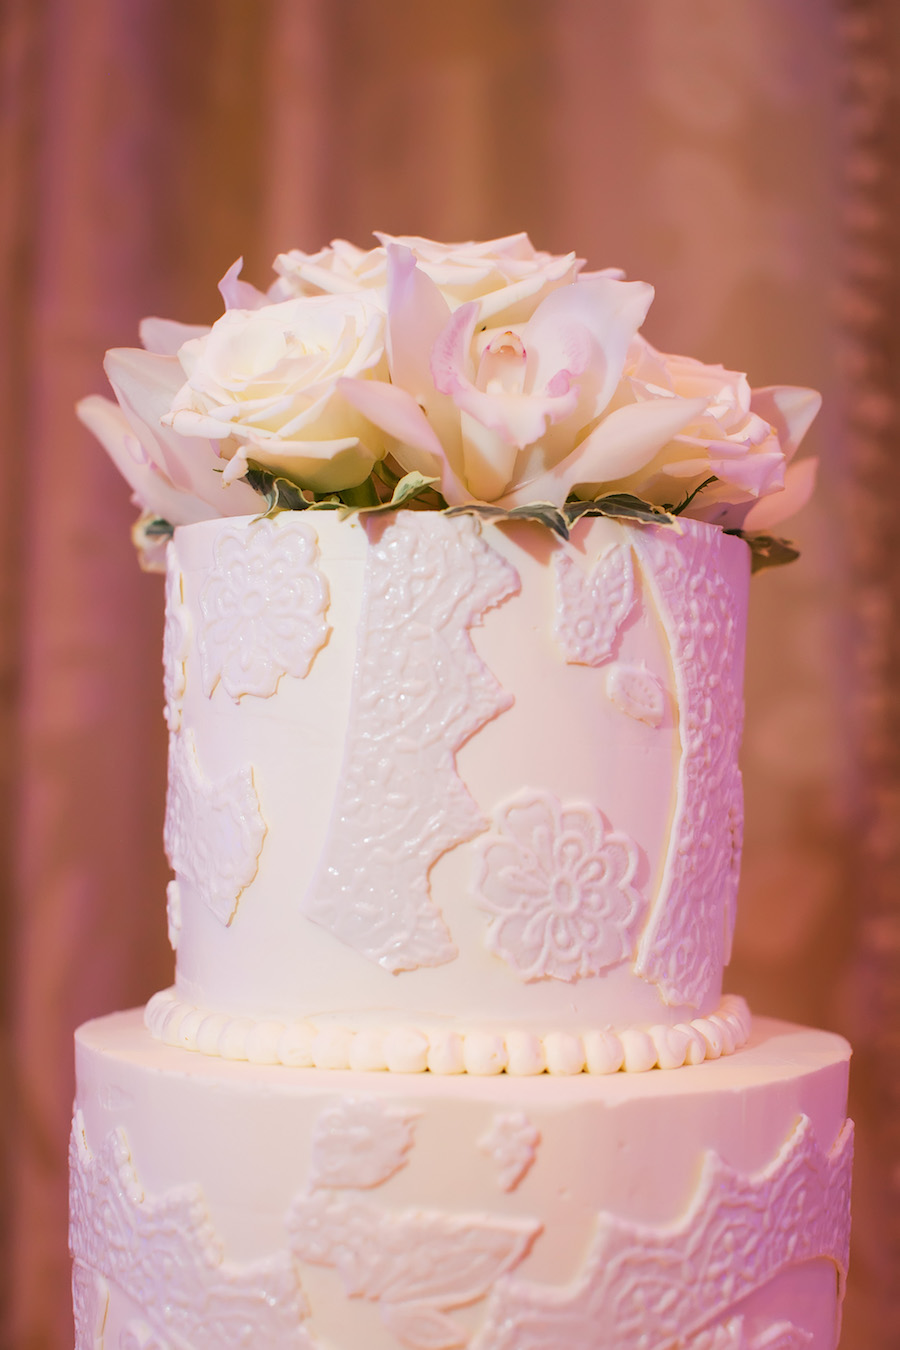 Round White Wedding Cake with Ivory Roses Cake Topper and Lace Sugar Appliqué